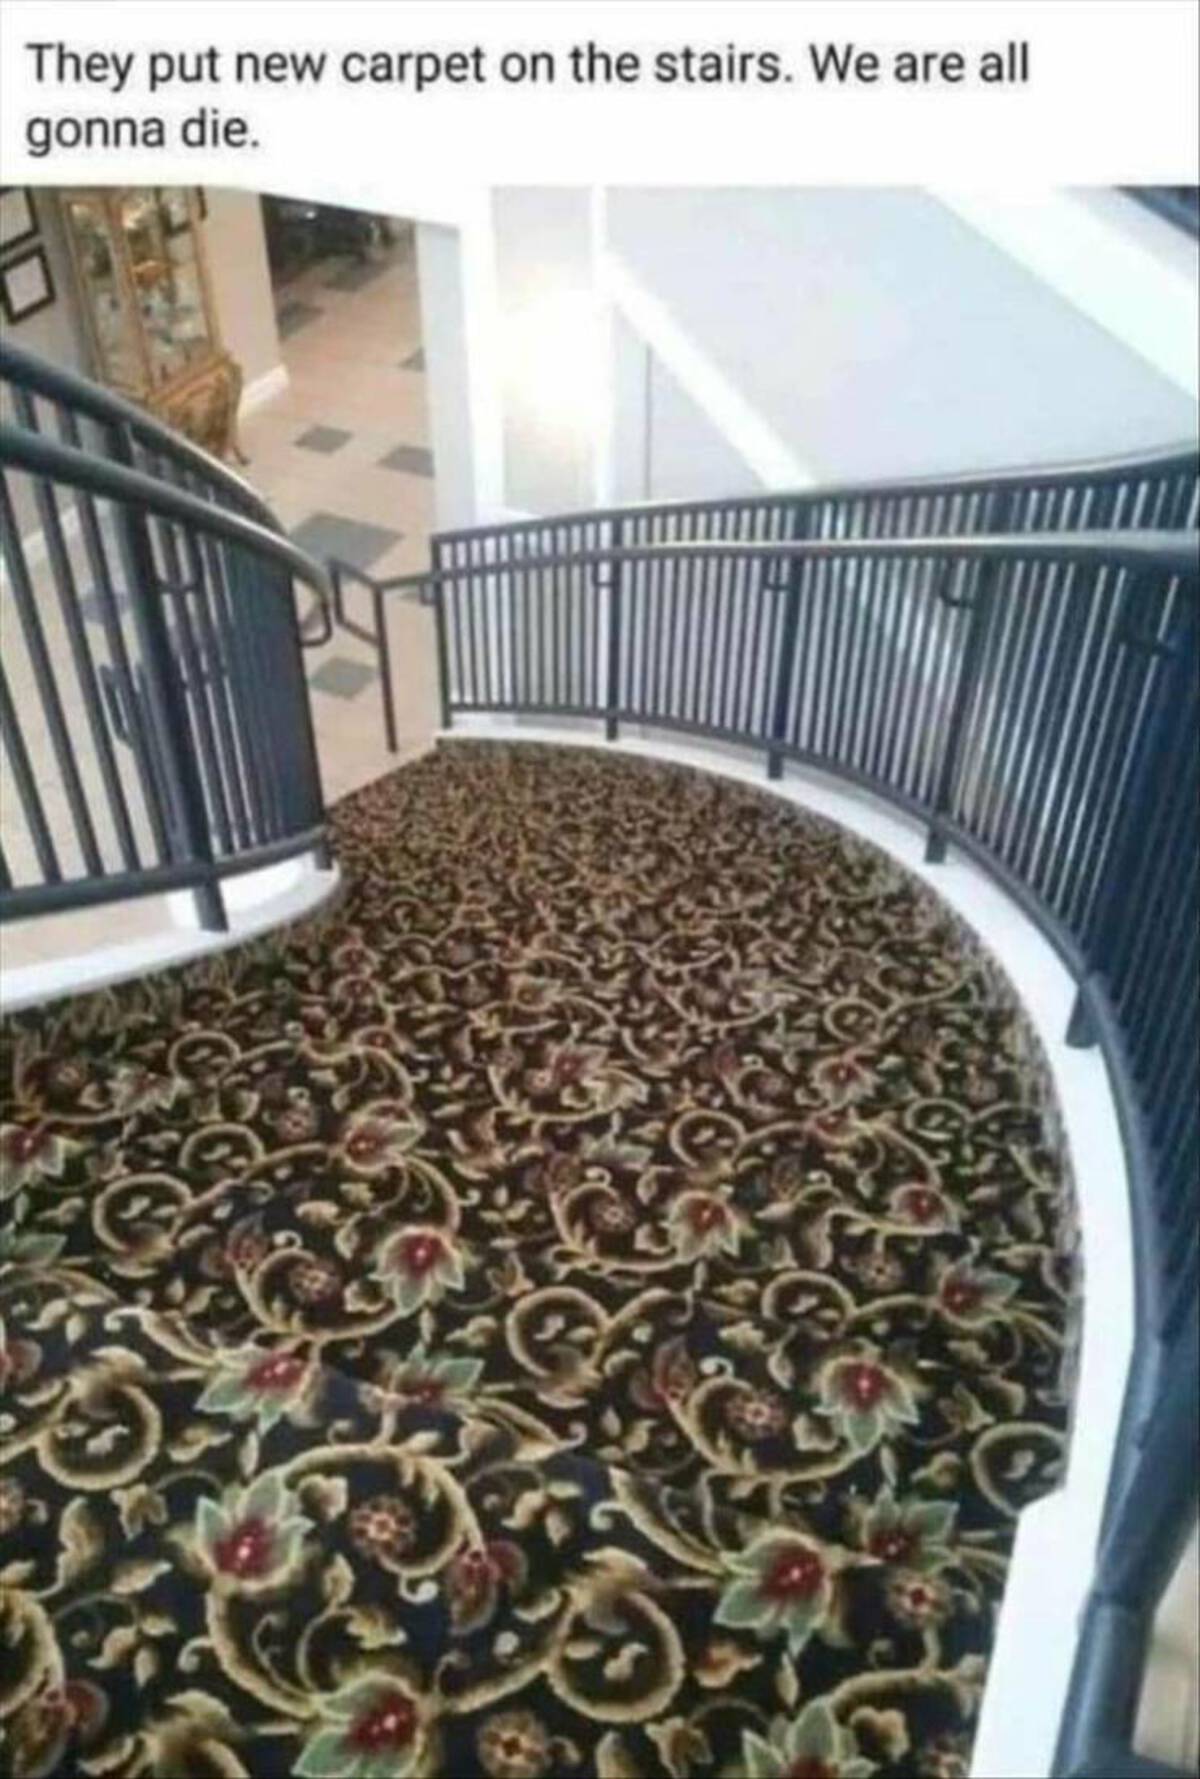 They put new carpet on the stairs. We are all gonna die.